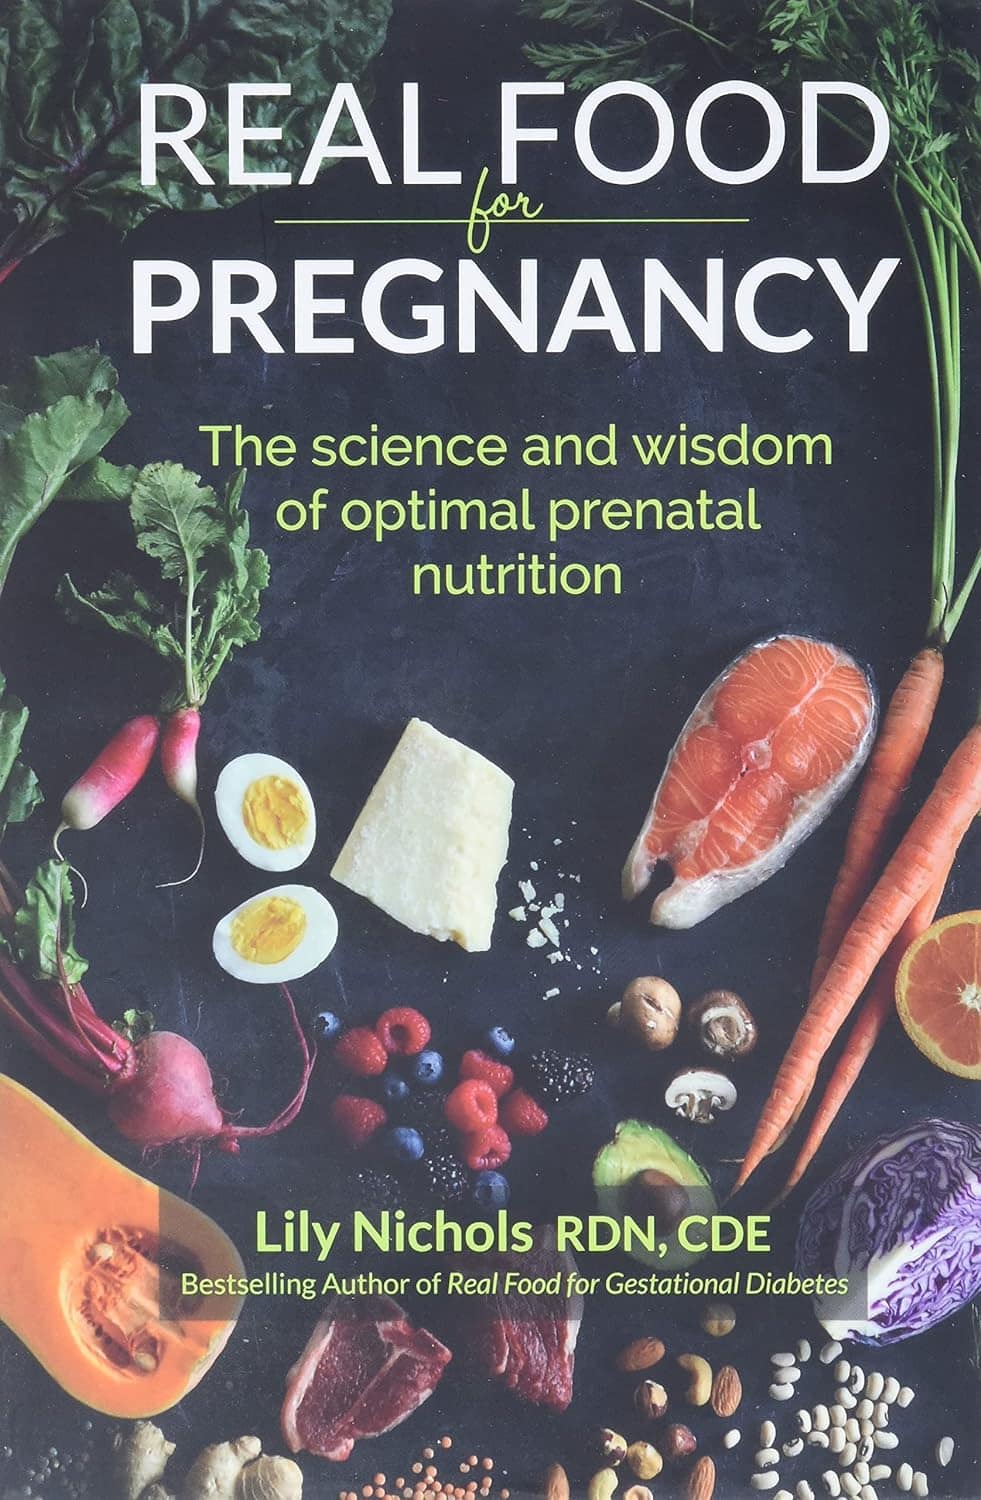 Real Food for Pregnancy: The Science and Wisdom of Optimal Prenatal Nutrition – Lily Nichols